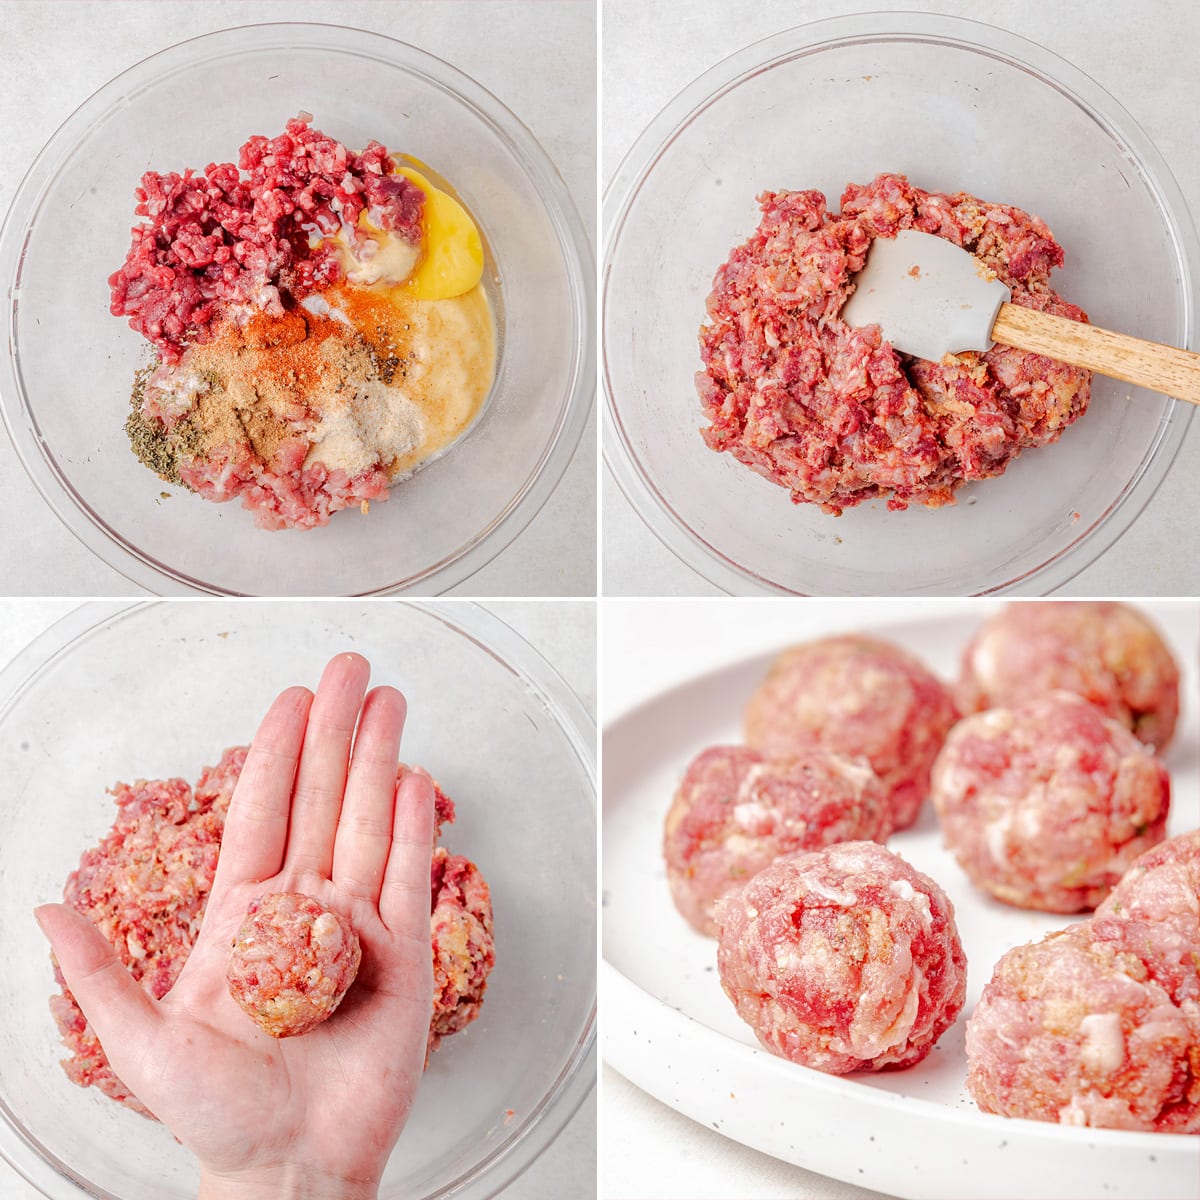 How to make the meatballs for the stew.